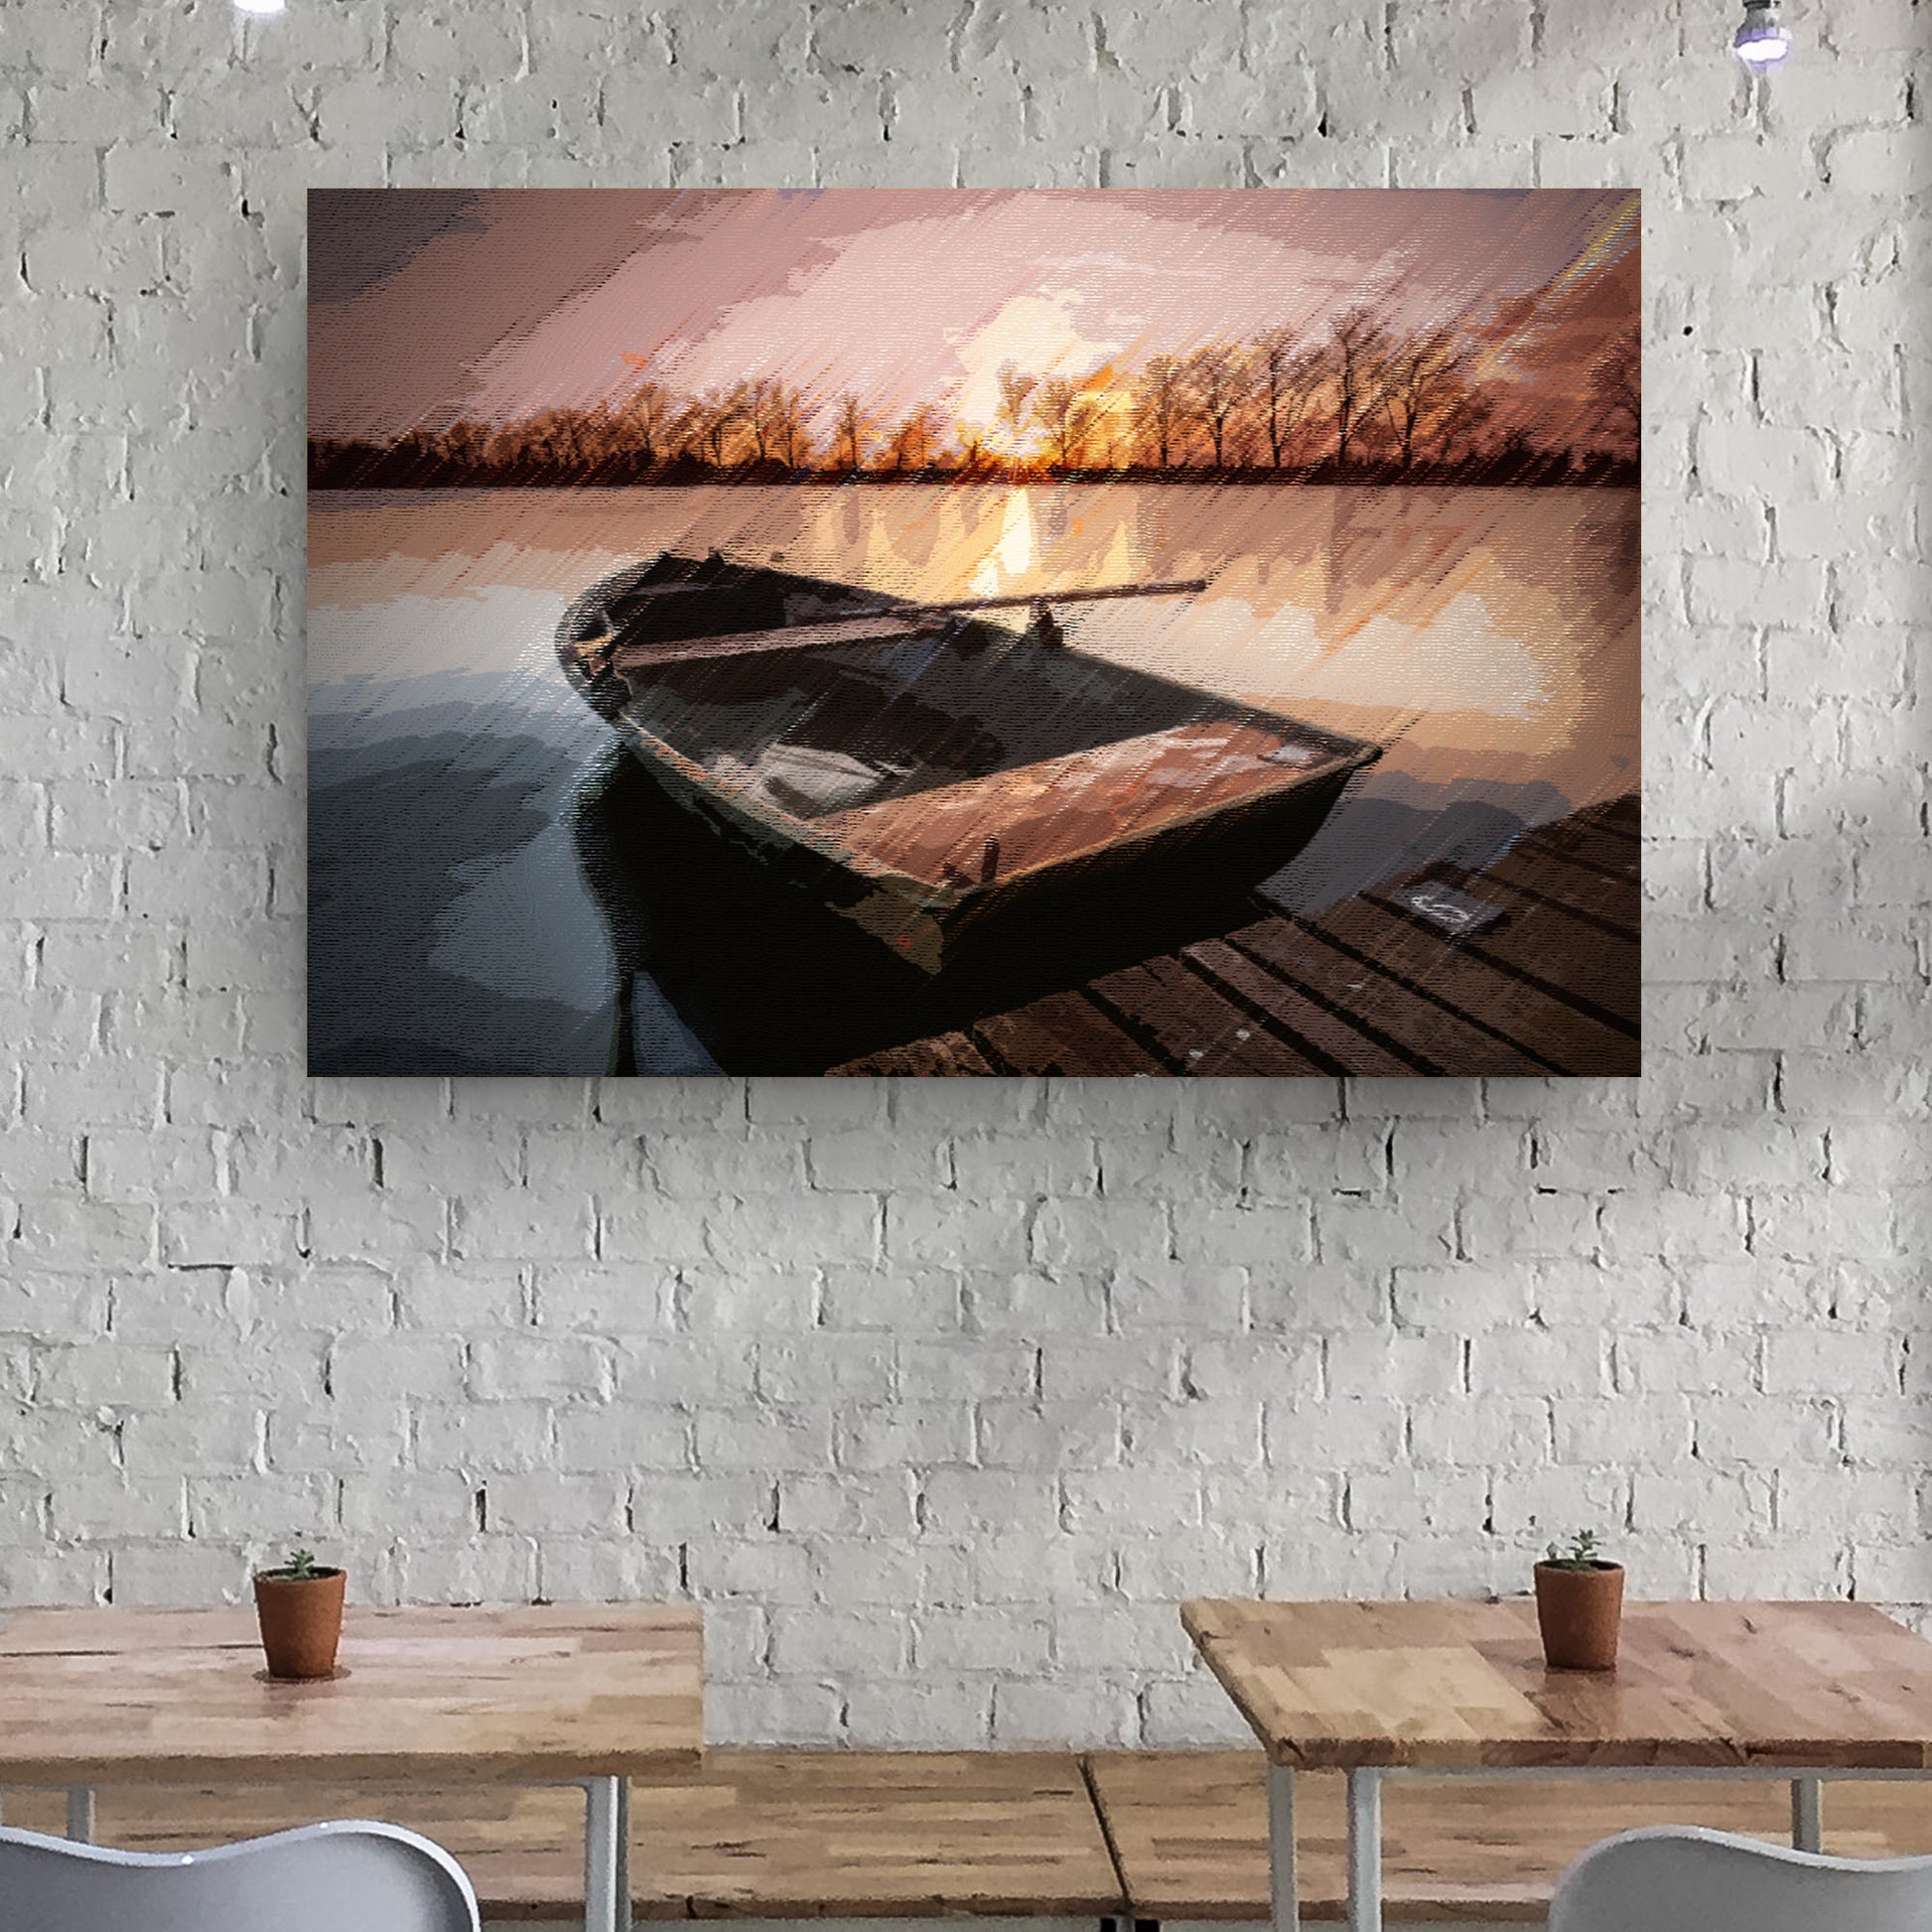 Lake Canoe Canvas Wall Art II - Image by Tailored Canvases